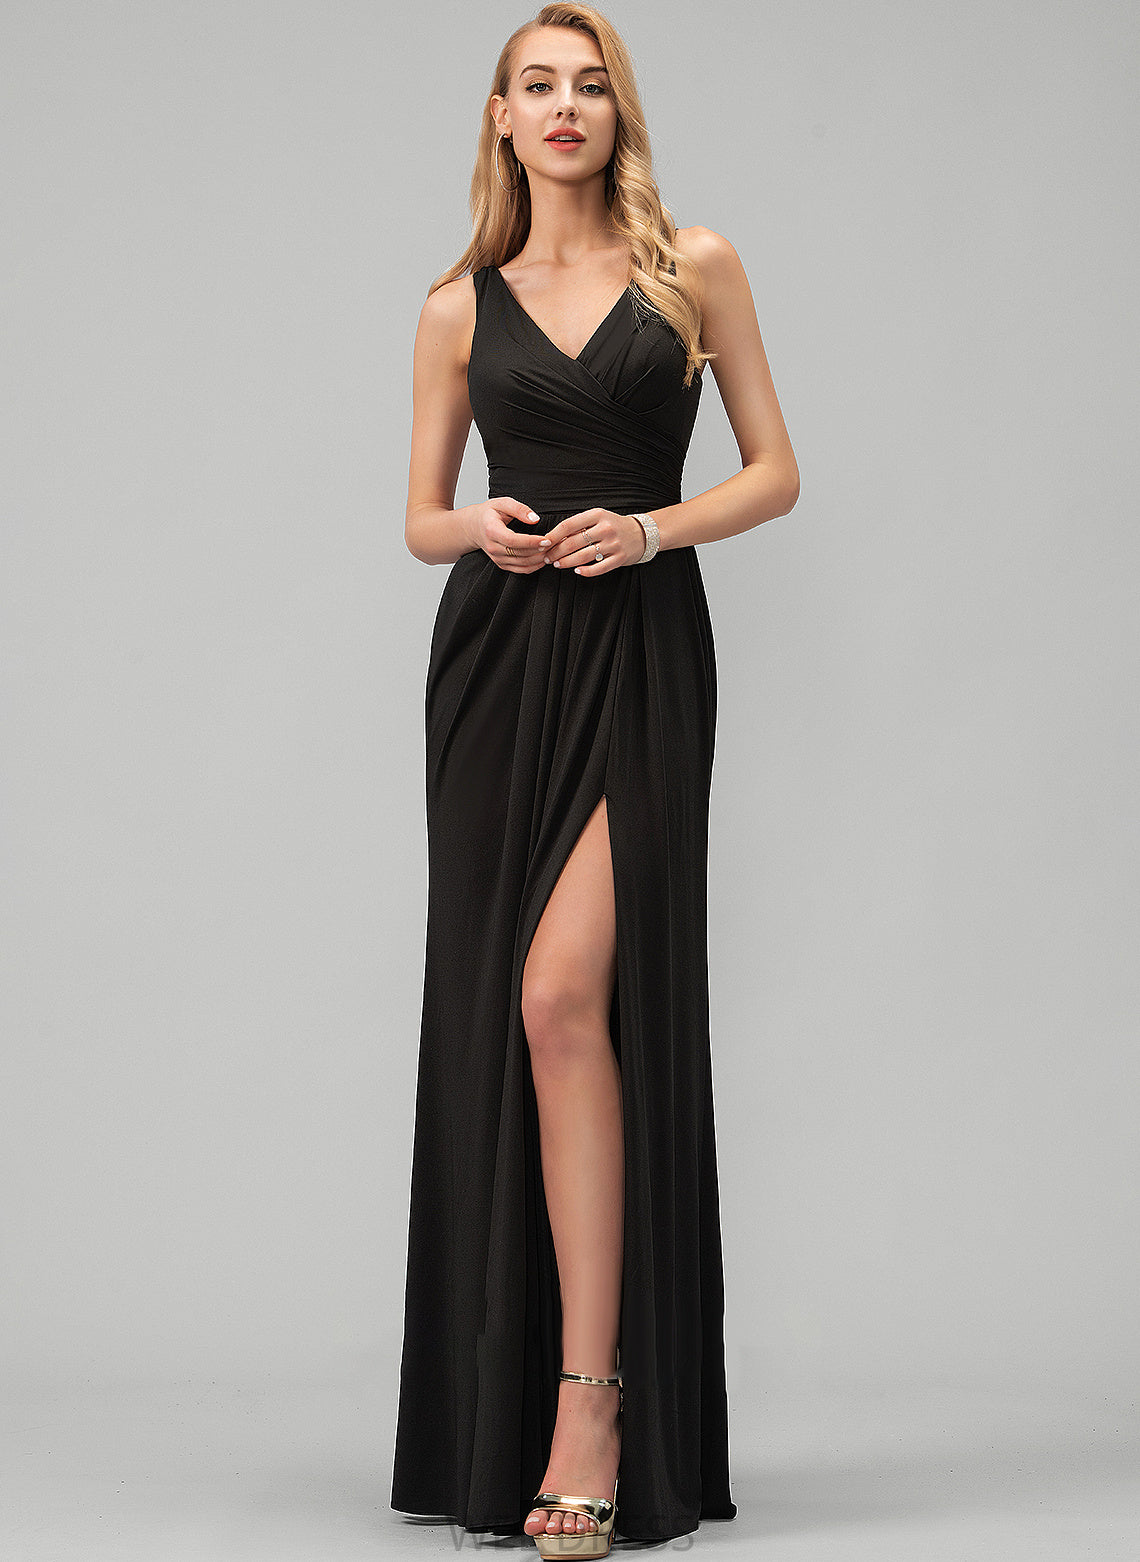 Floor-Length Prom Dresses Front Split Brynlee Ruffle A-Line With V-neck Jersey